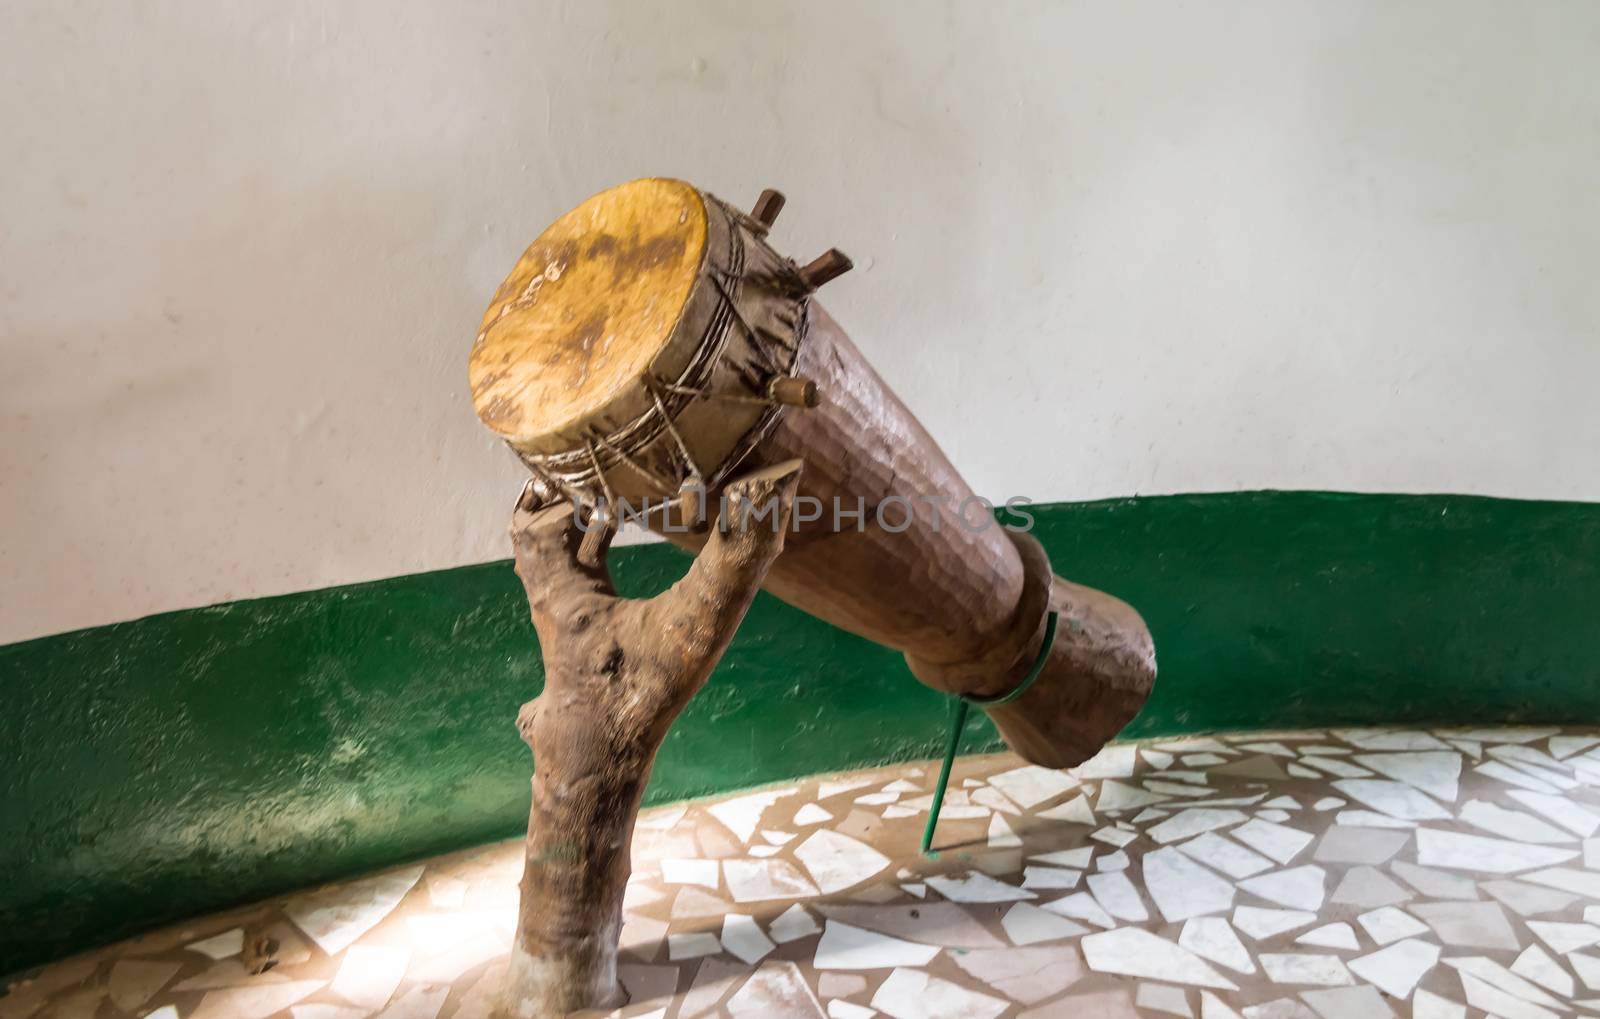 Original African djembe drum with leather blade lay on a treadmill forming a trunk in Gambia